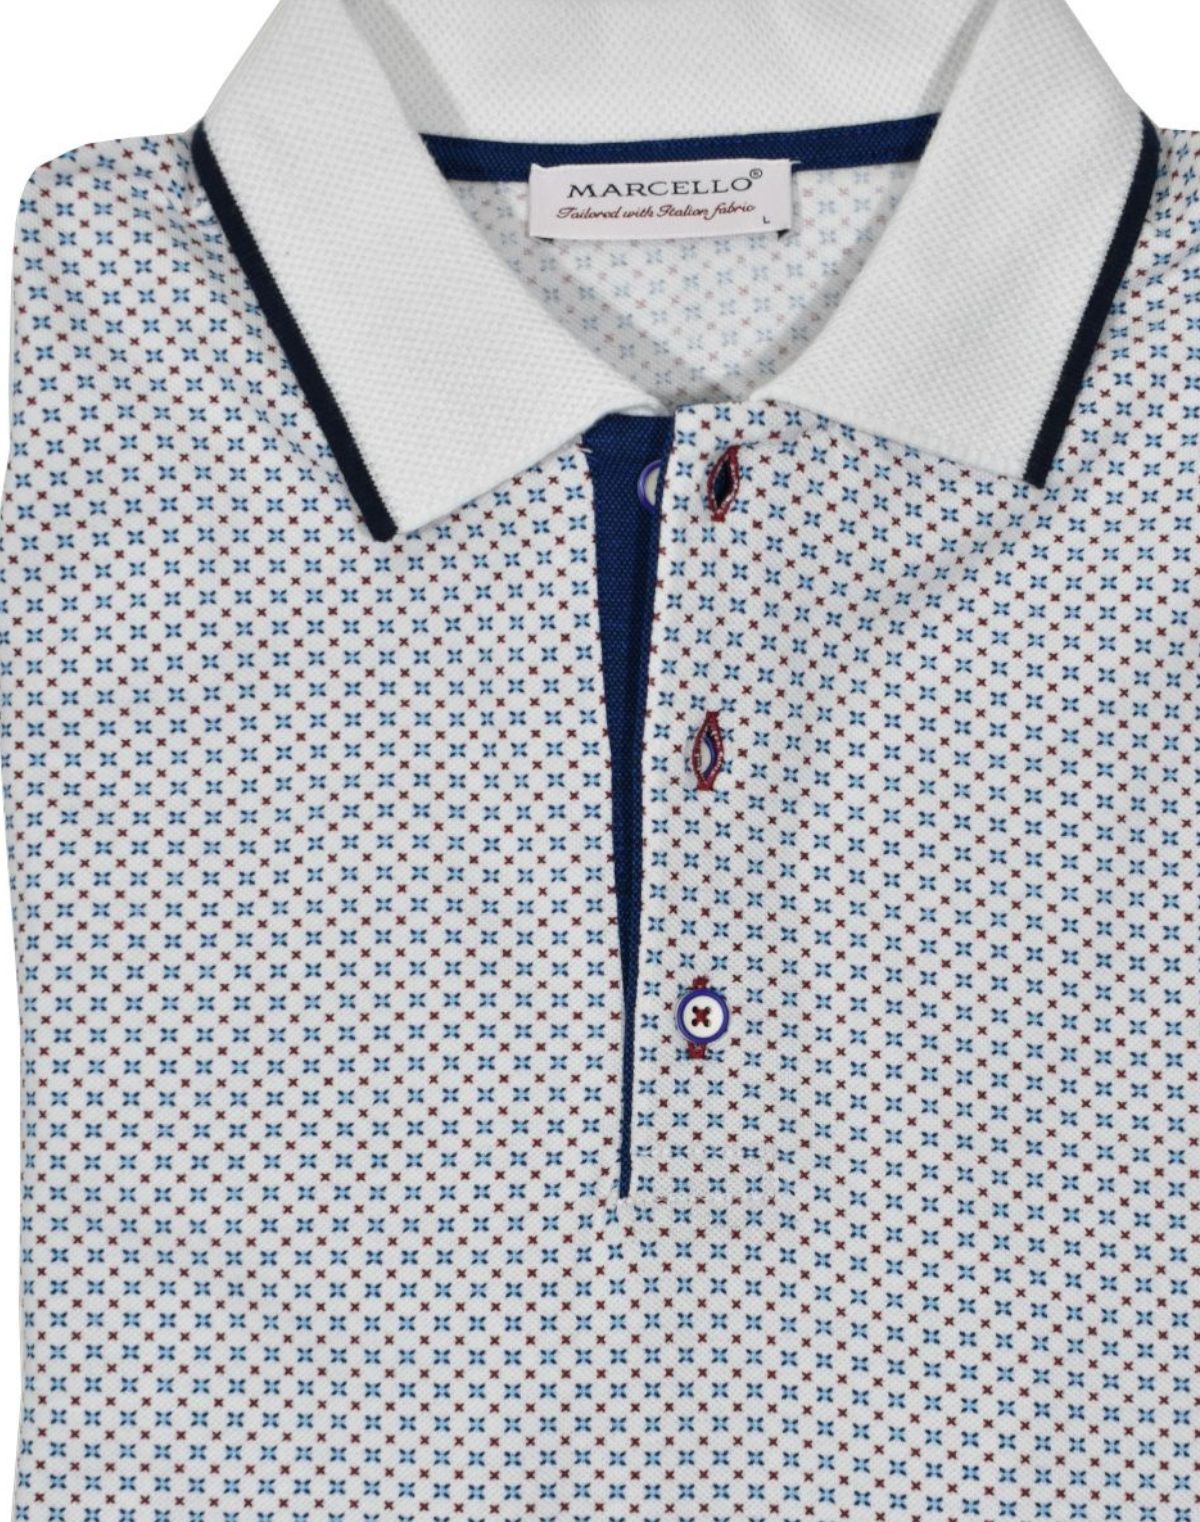 Soft, white, cotton pique fabric sporting a fine small geometric medallion in blue, teal and white colors, that creates a sophisticated clean image perfect for any setting.  Clean collar tipped in contrast color, custom buttons and contrast color fabric along the buttons.  Classic fit.